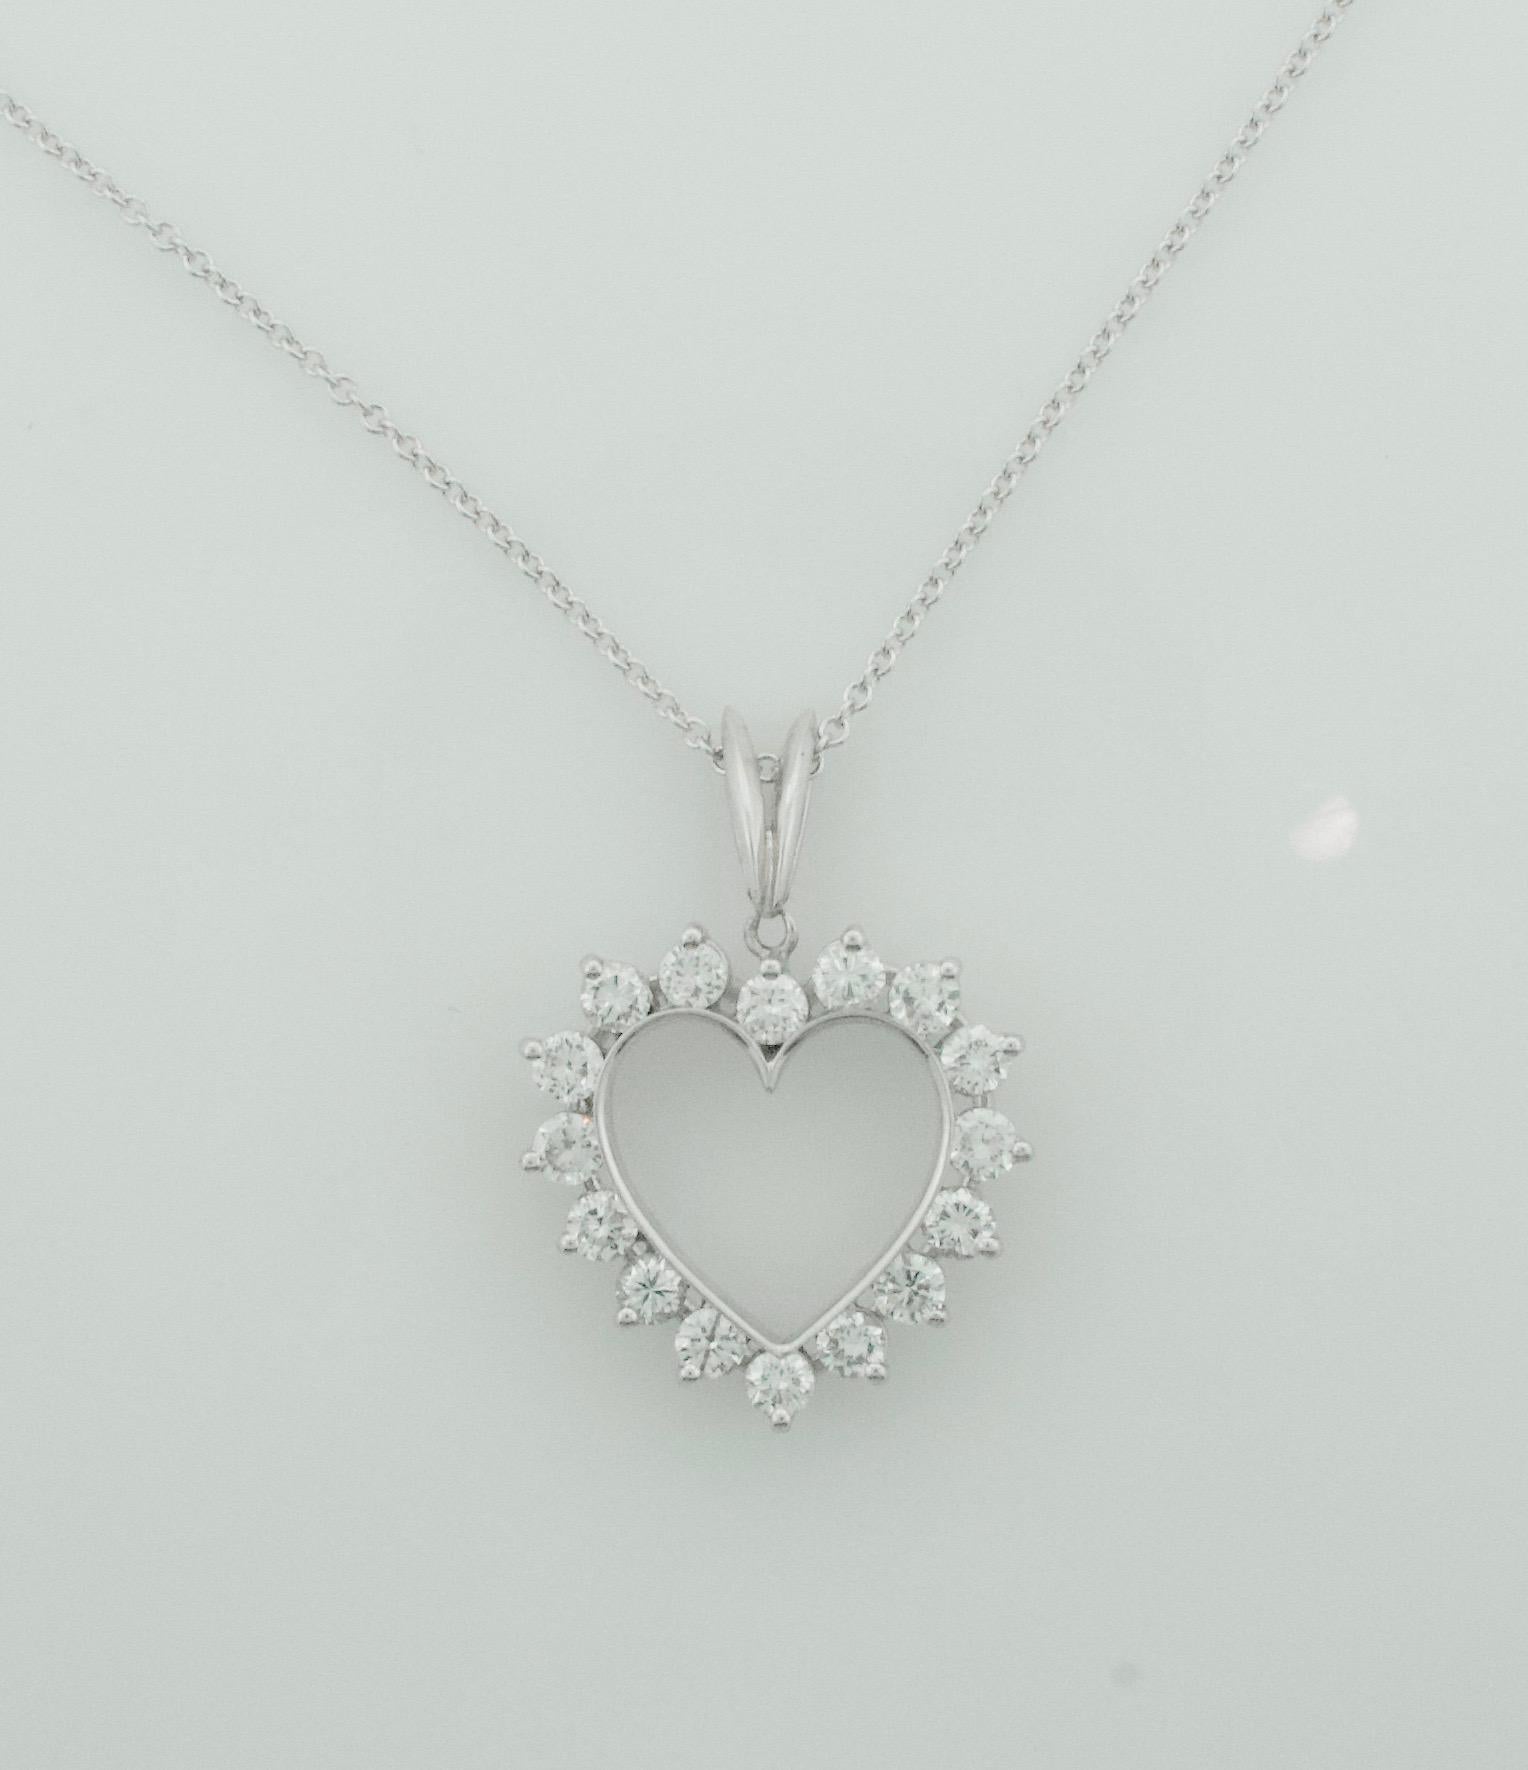 Thee Classic Diamond Heart Pendant on Chain 1.75 Carats Circa 1960's
16 Round Brilliant Cut Diamonds Weighing 1.75 Carats Approximately [GH VVS-VS1]
Very Finely Made 
On a 18k 16 inch Fine Chain